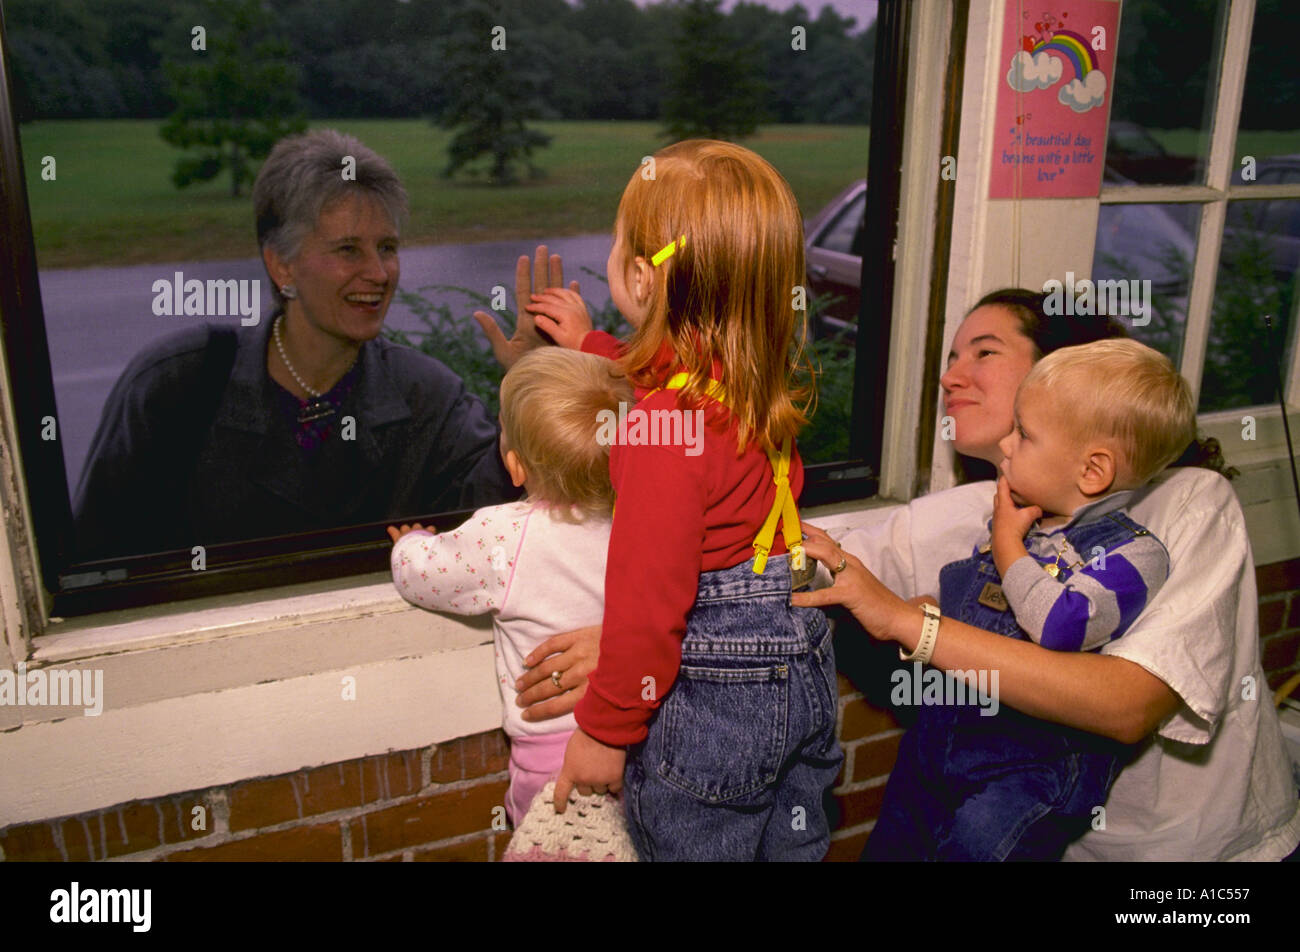 Children say good bye to parents through a window at a private day care center in Providence Rhode Island Stock Photo